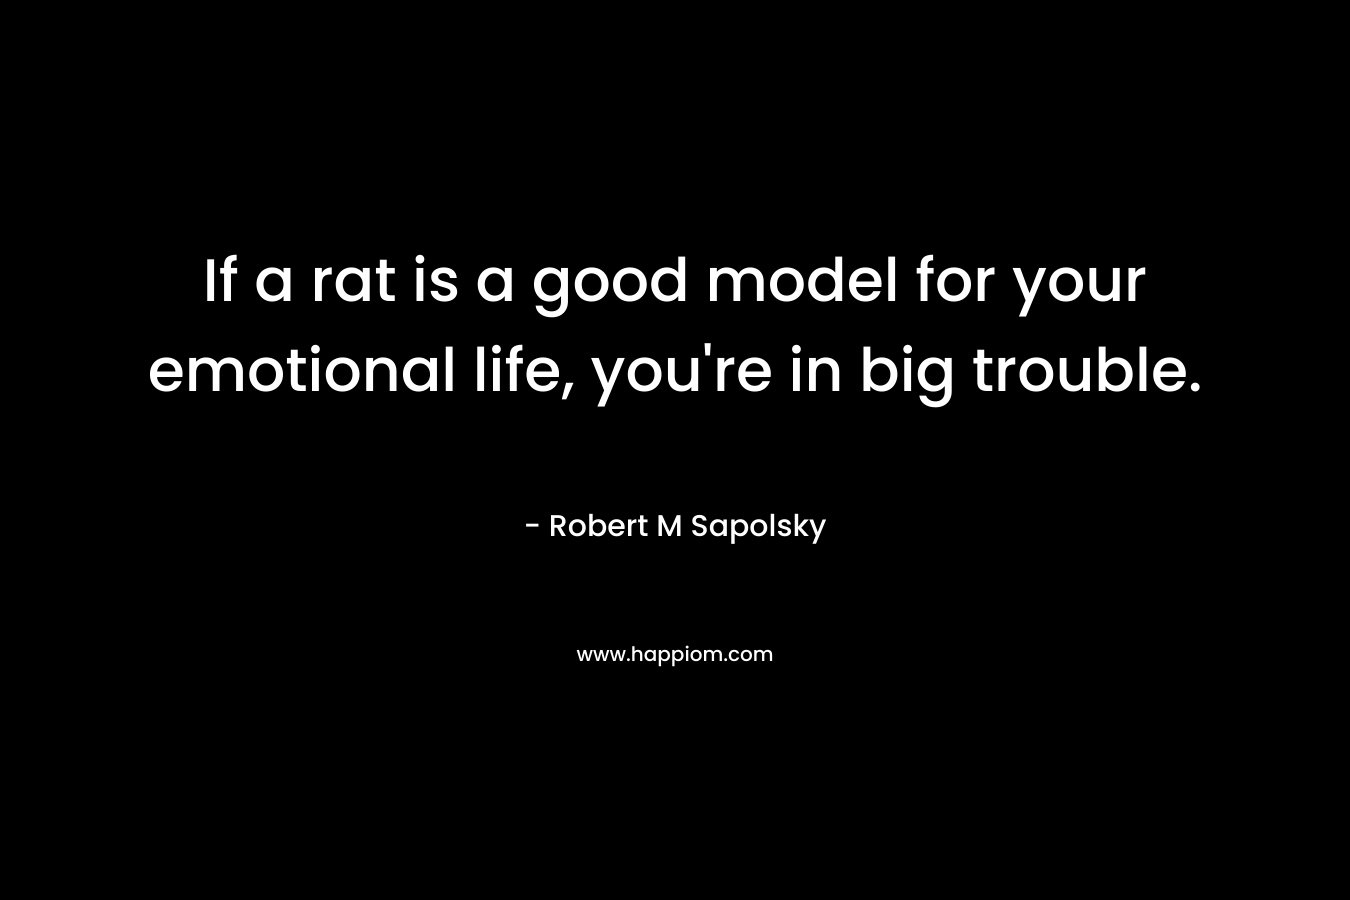 If a rat is a good model for your emotional life, you're in big trouble.